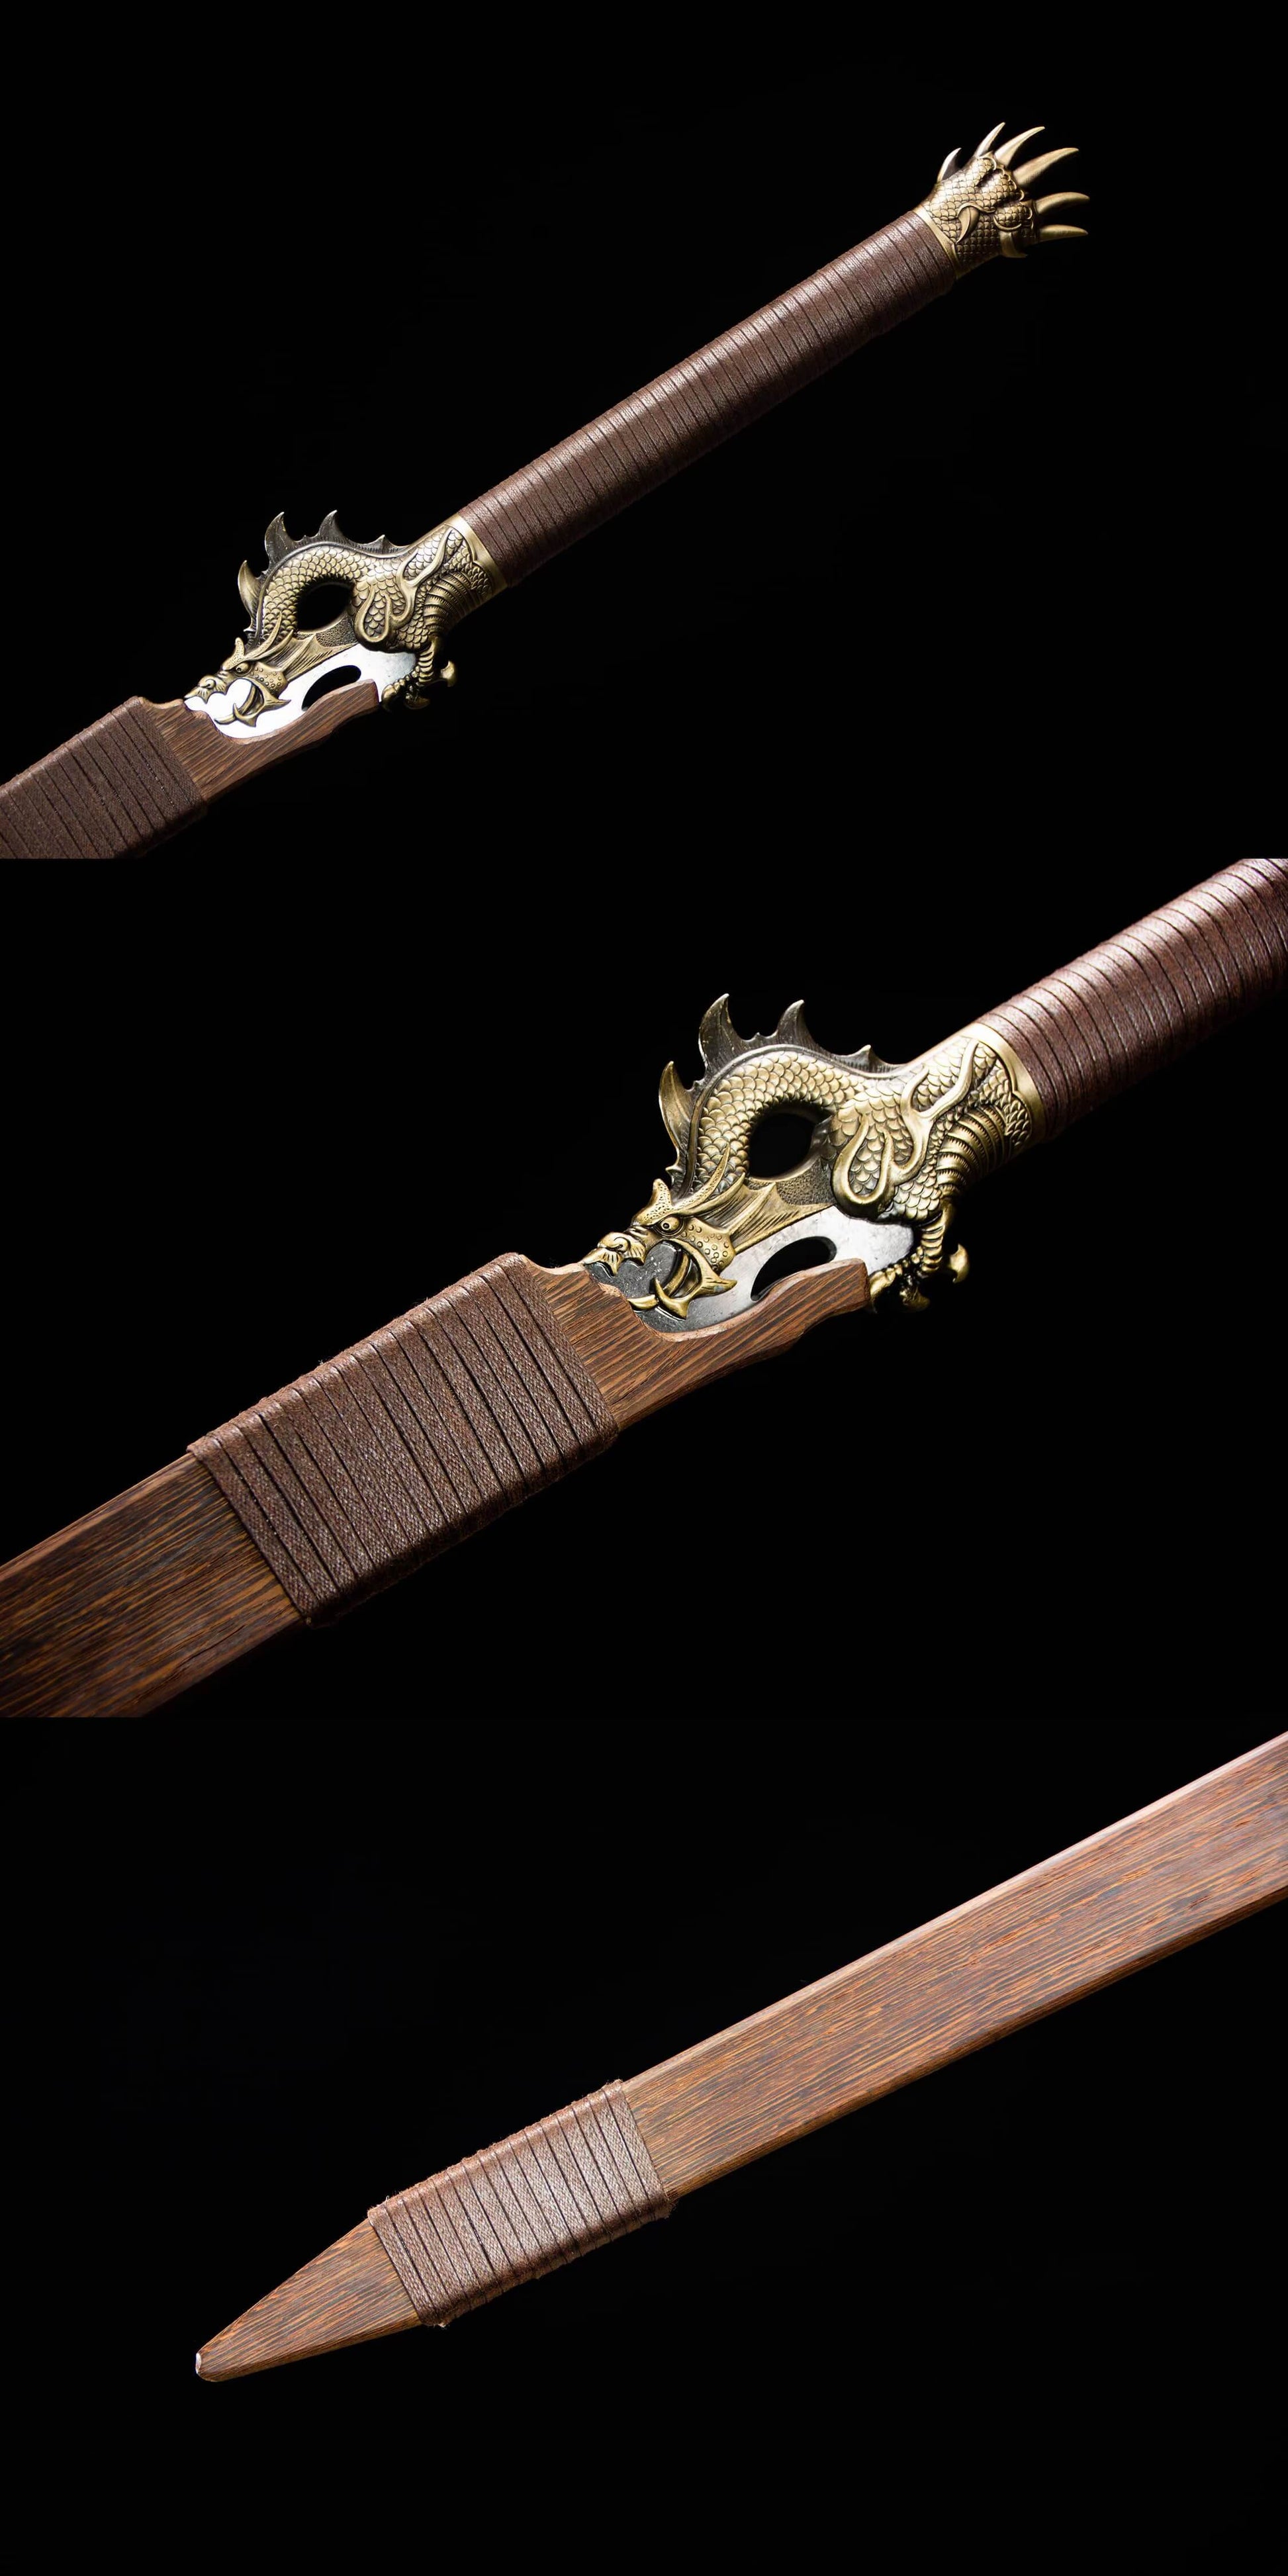 Loong Jian Swords Real,High Carbon Steel Blade,Alloy Fittings,Rosewood Scabbard